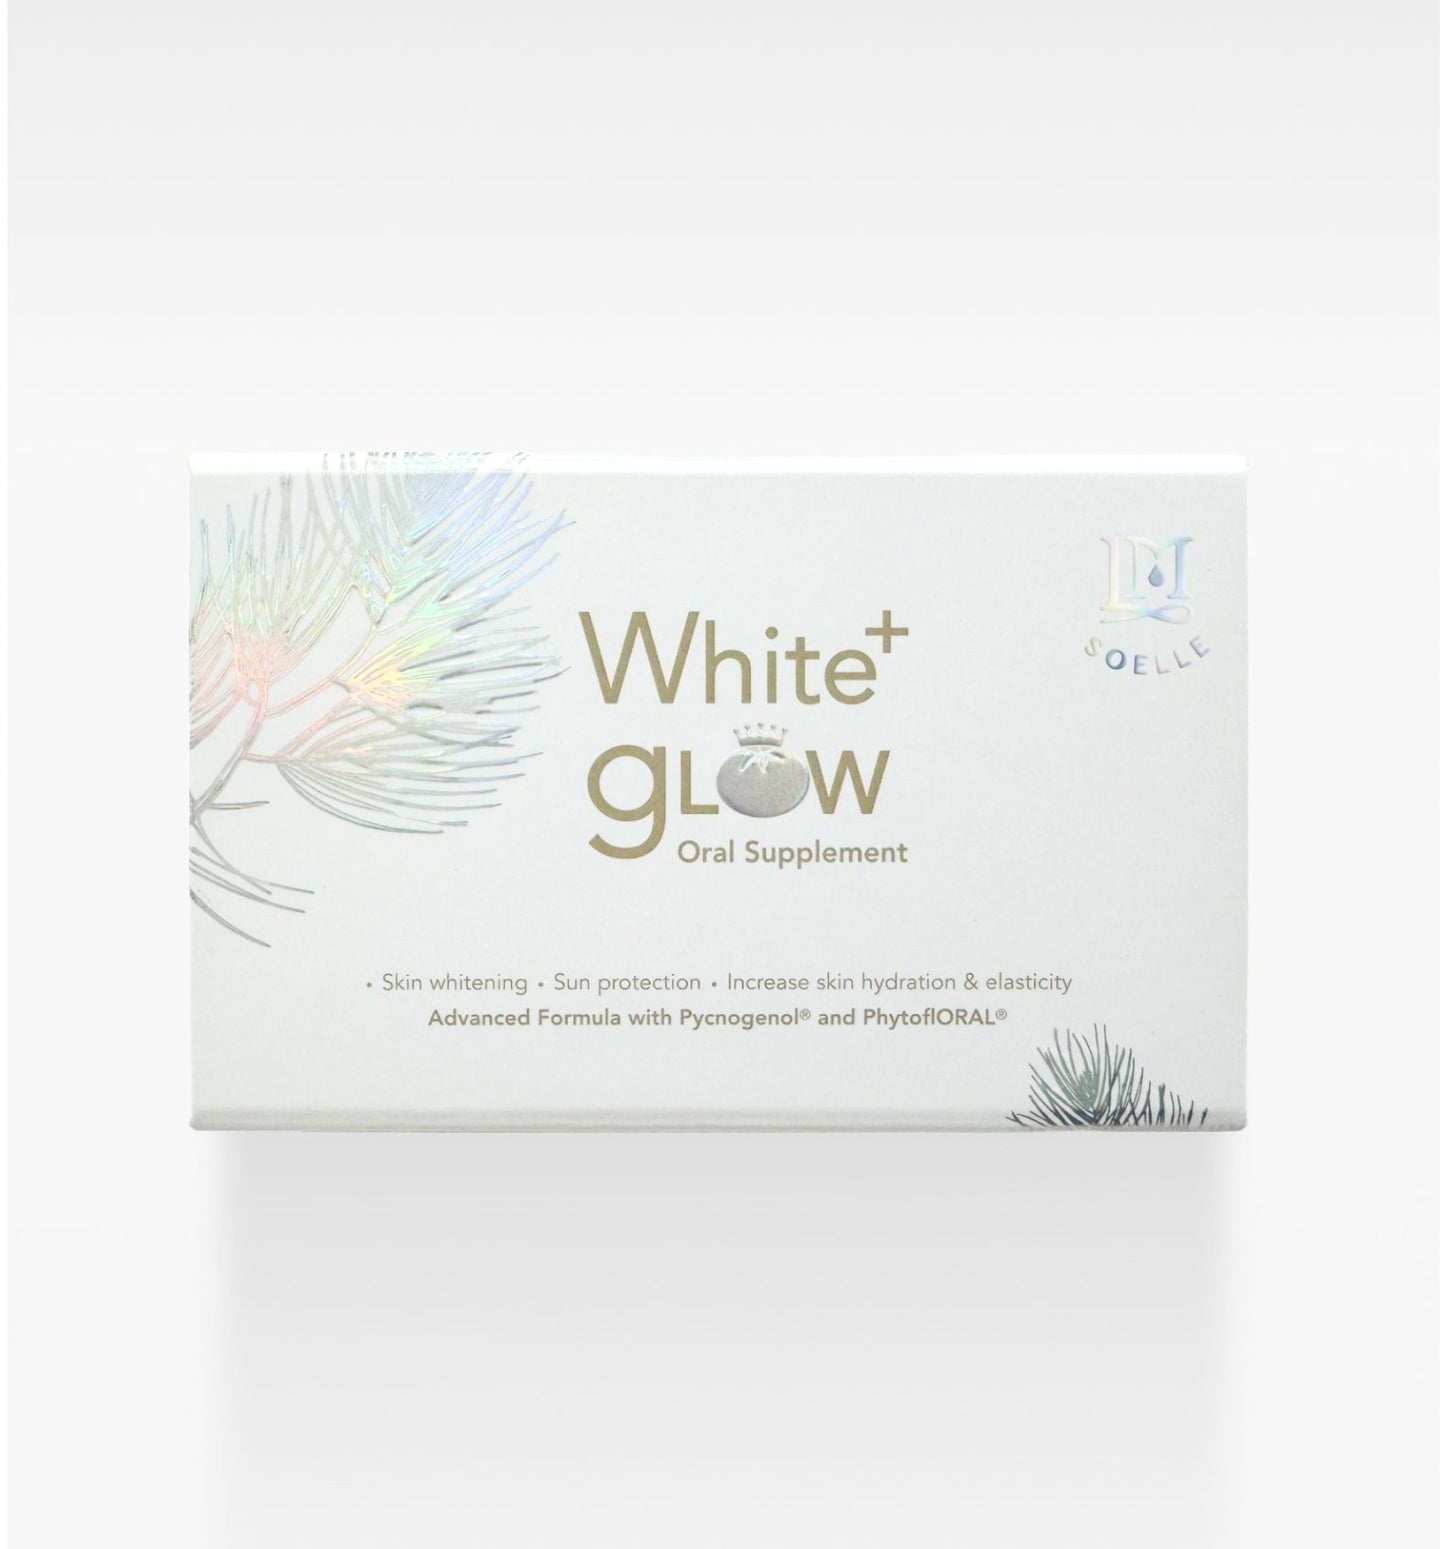 NEW! White⁺ Glow Oral Supplement